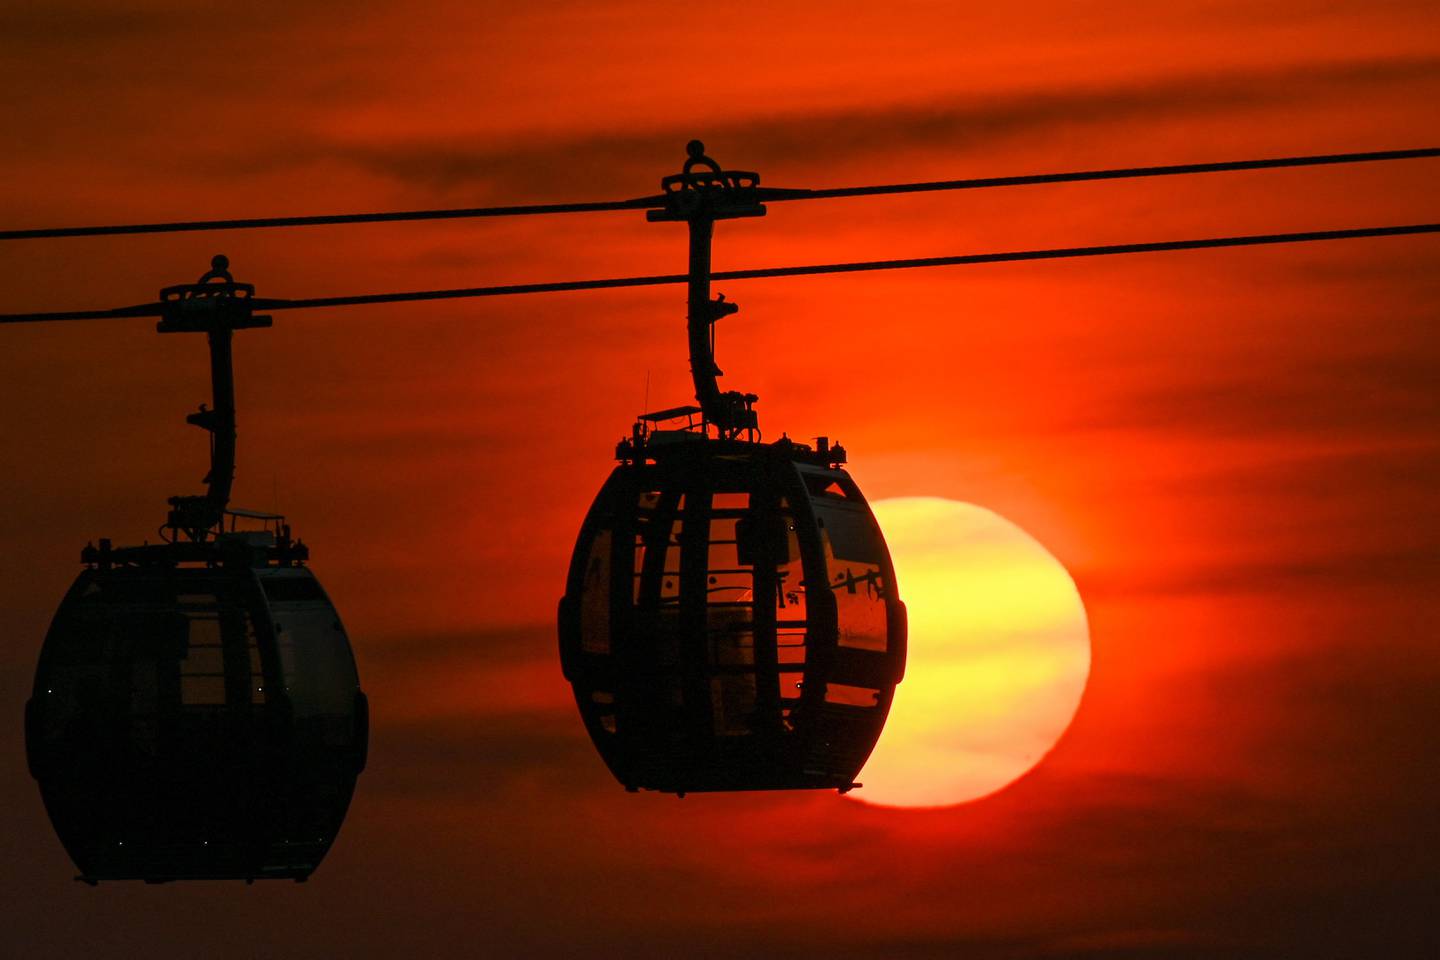 The sun sets behind cable cars in Singapore on October 15, 2021. AFP